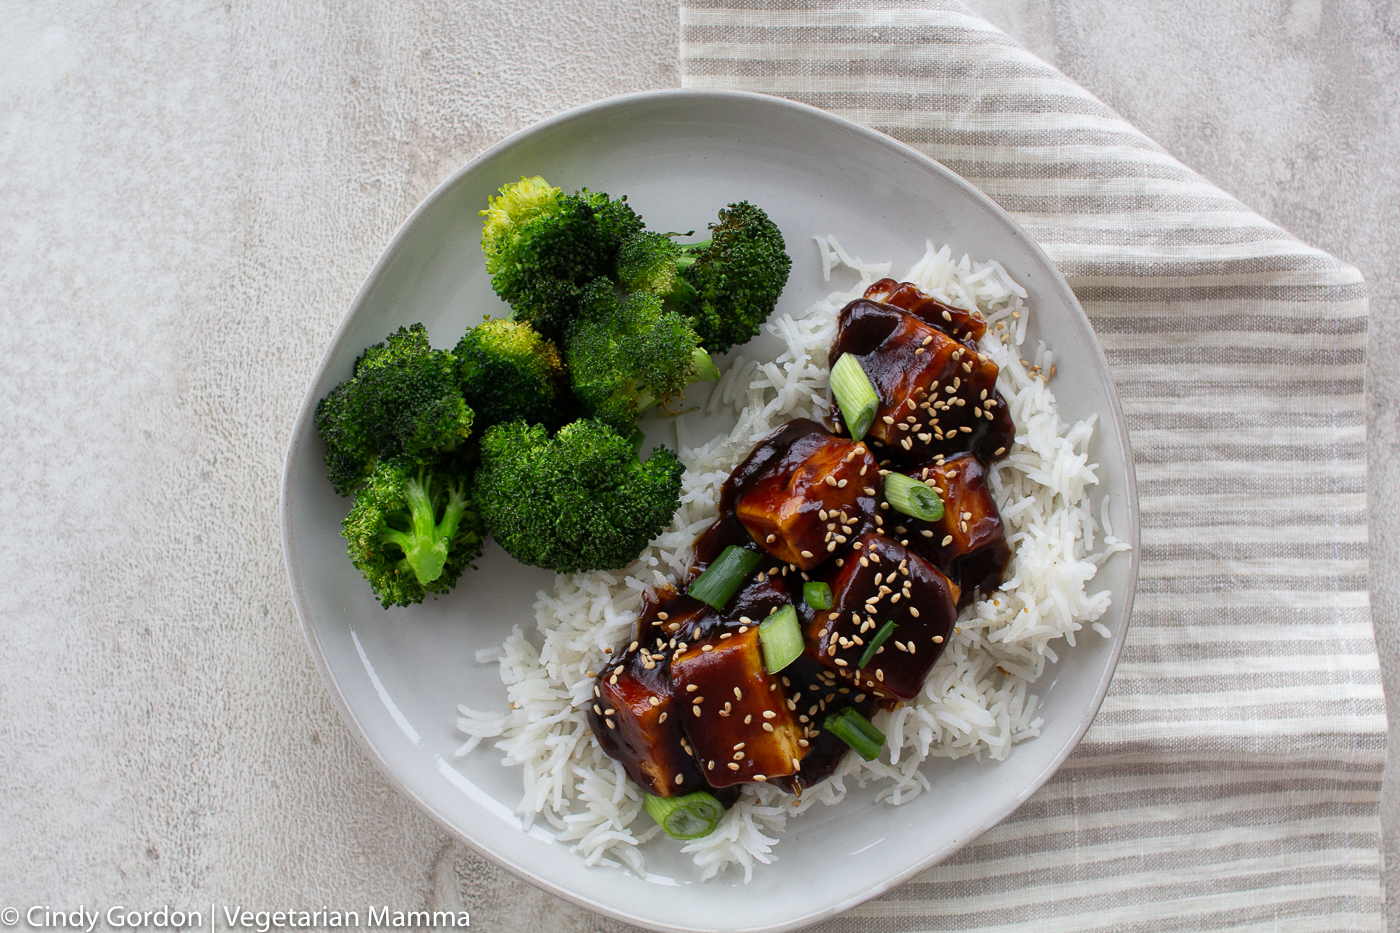 Saucy General Tso Tofu served with broccoli over rice